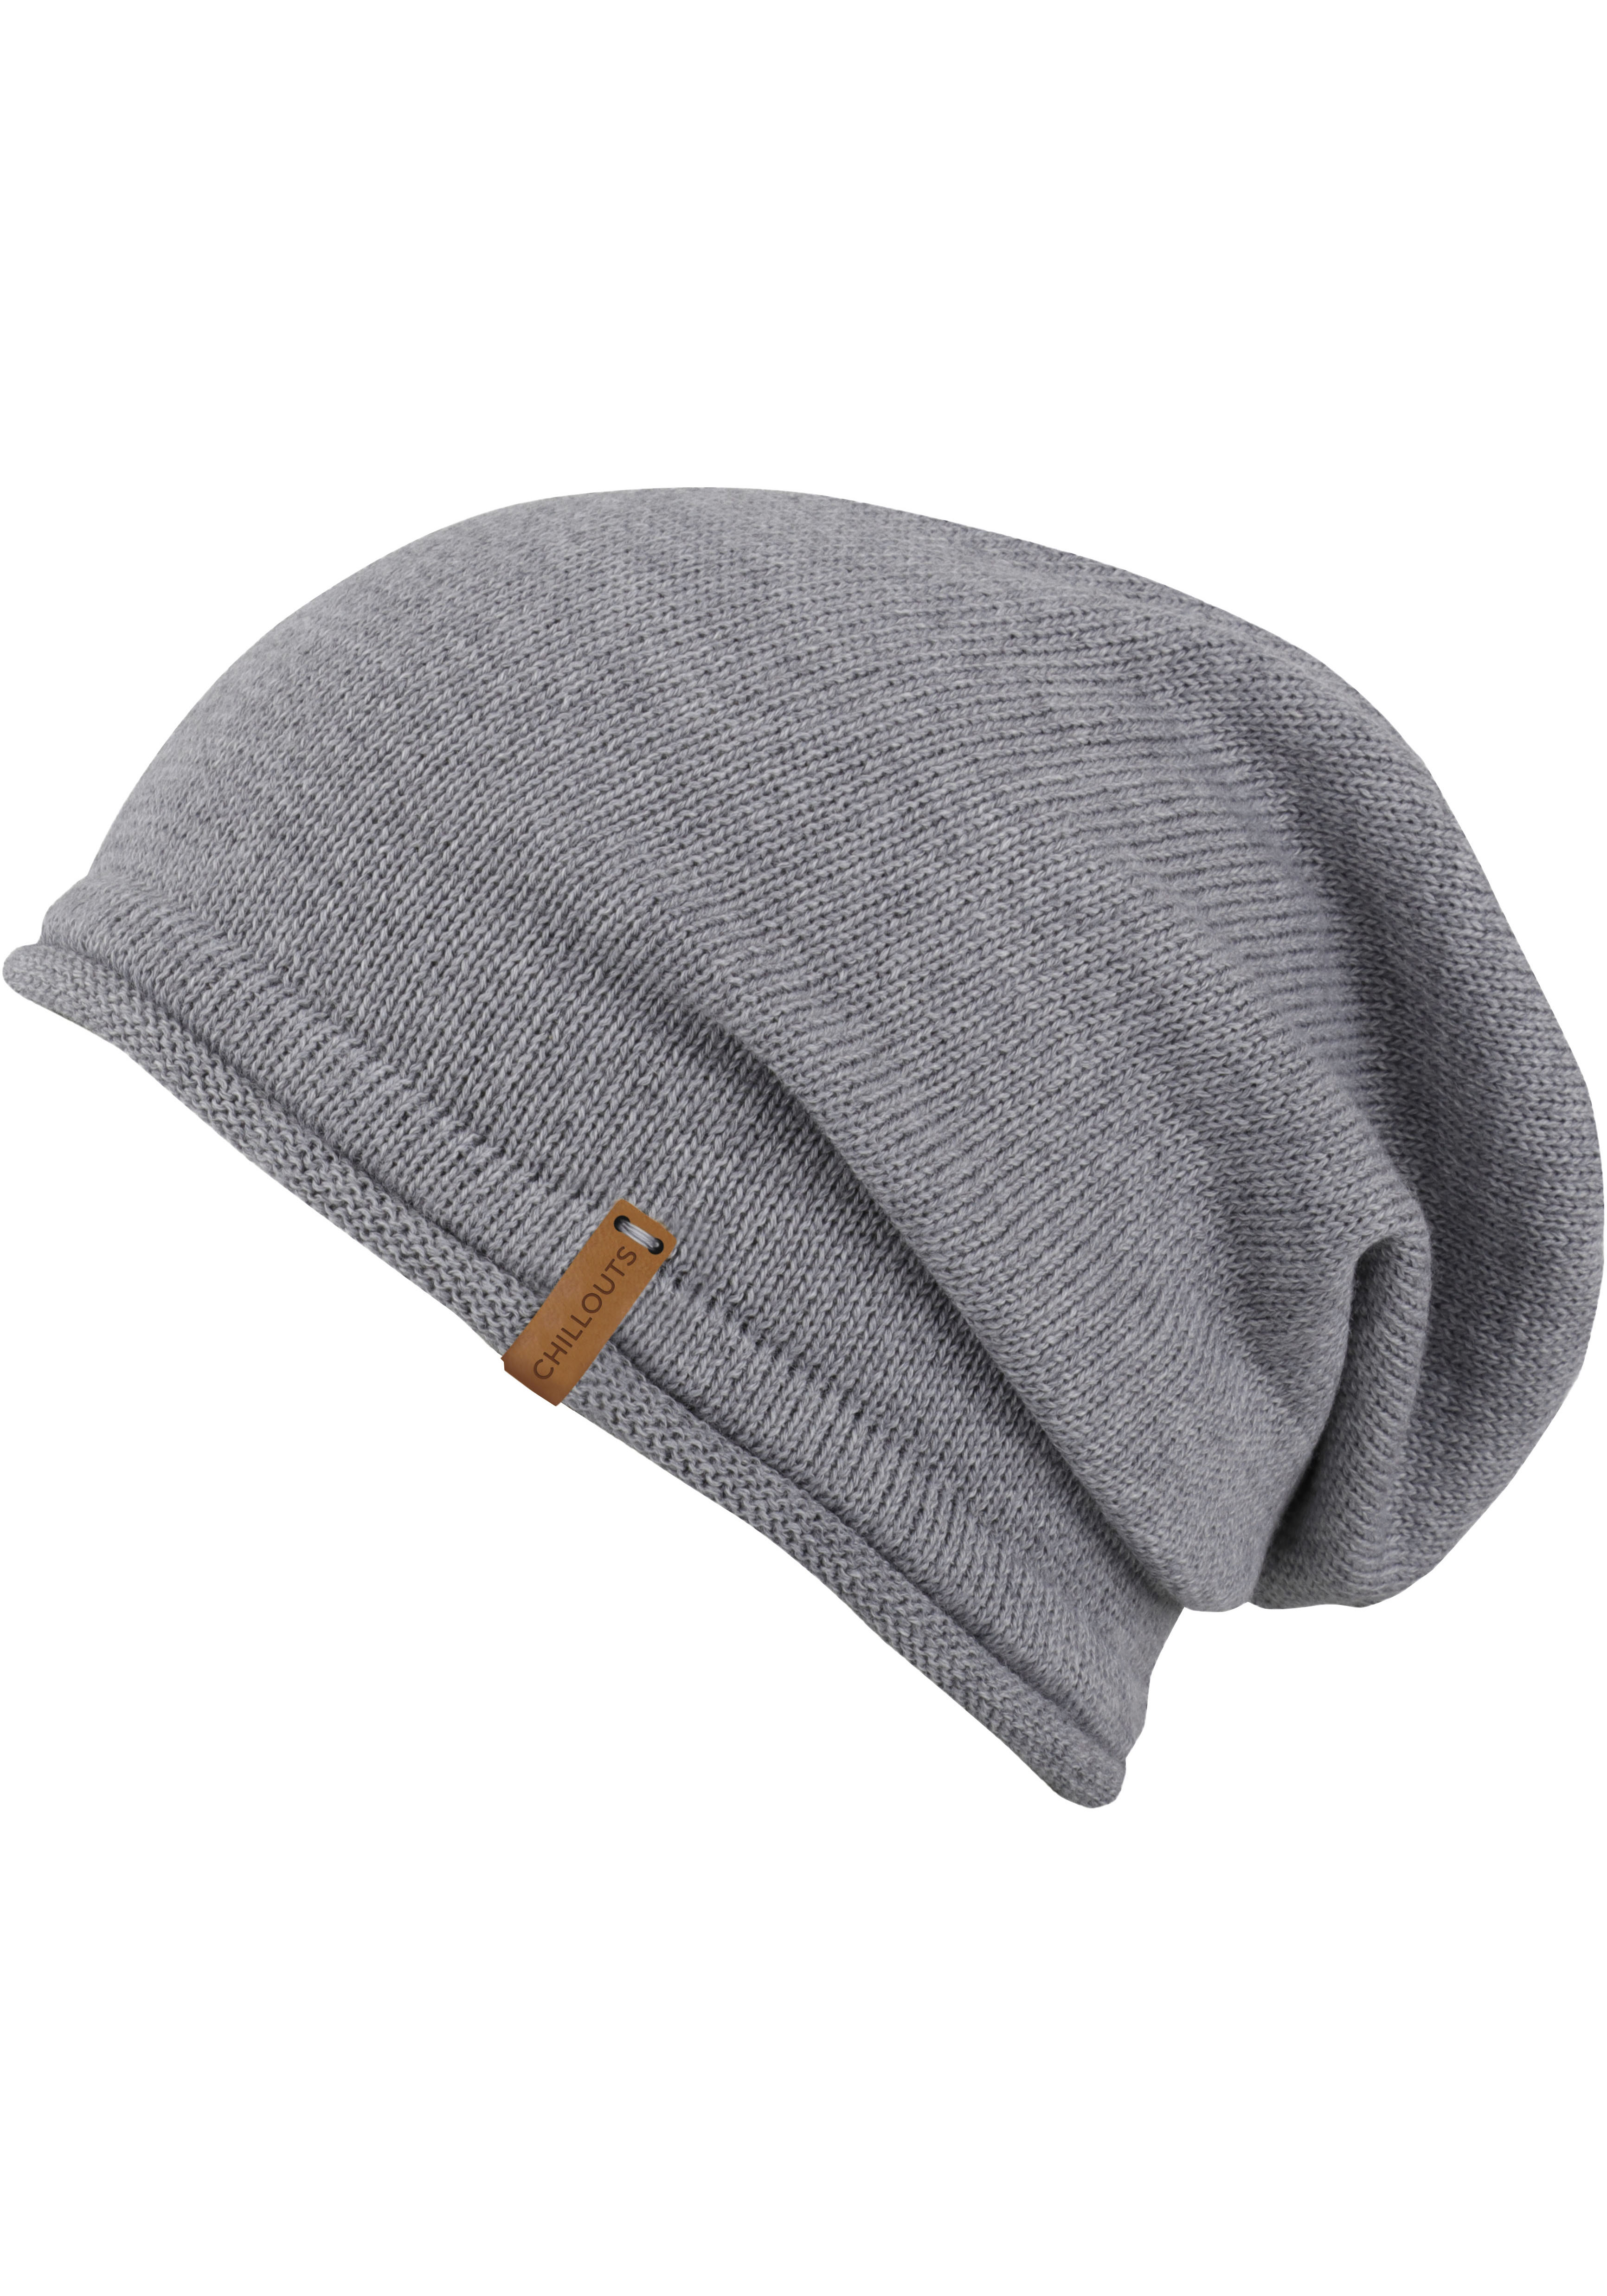 CHILLOUTS Unisex Mütze Leicester Hat hellgrauOne Size